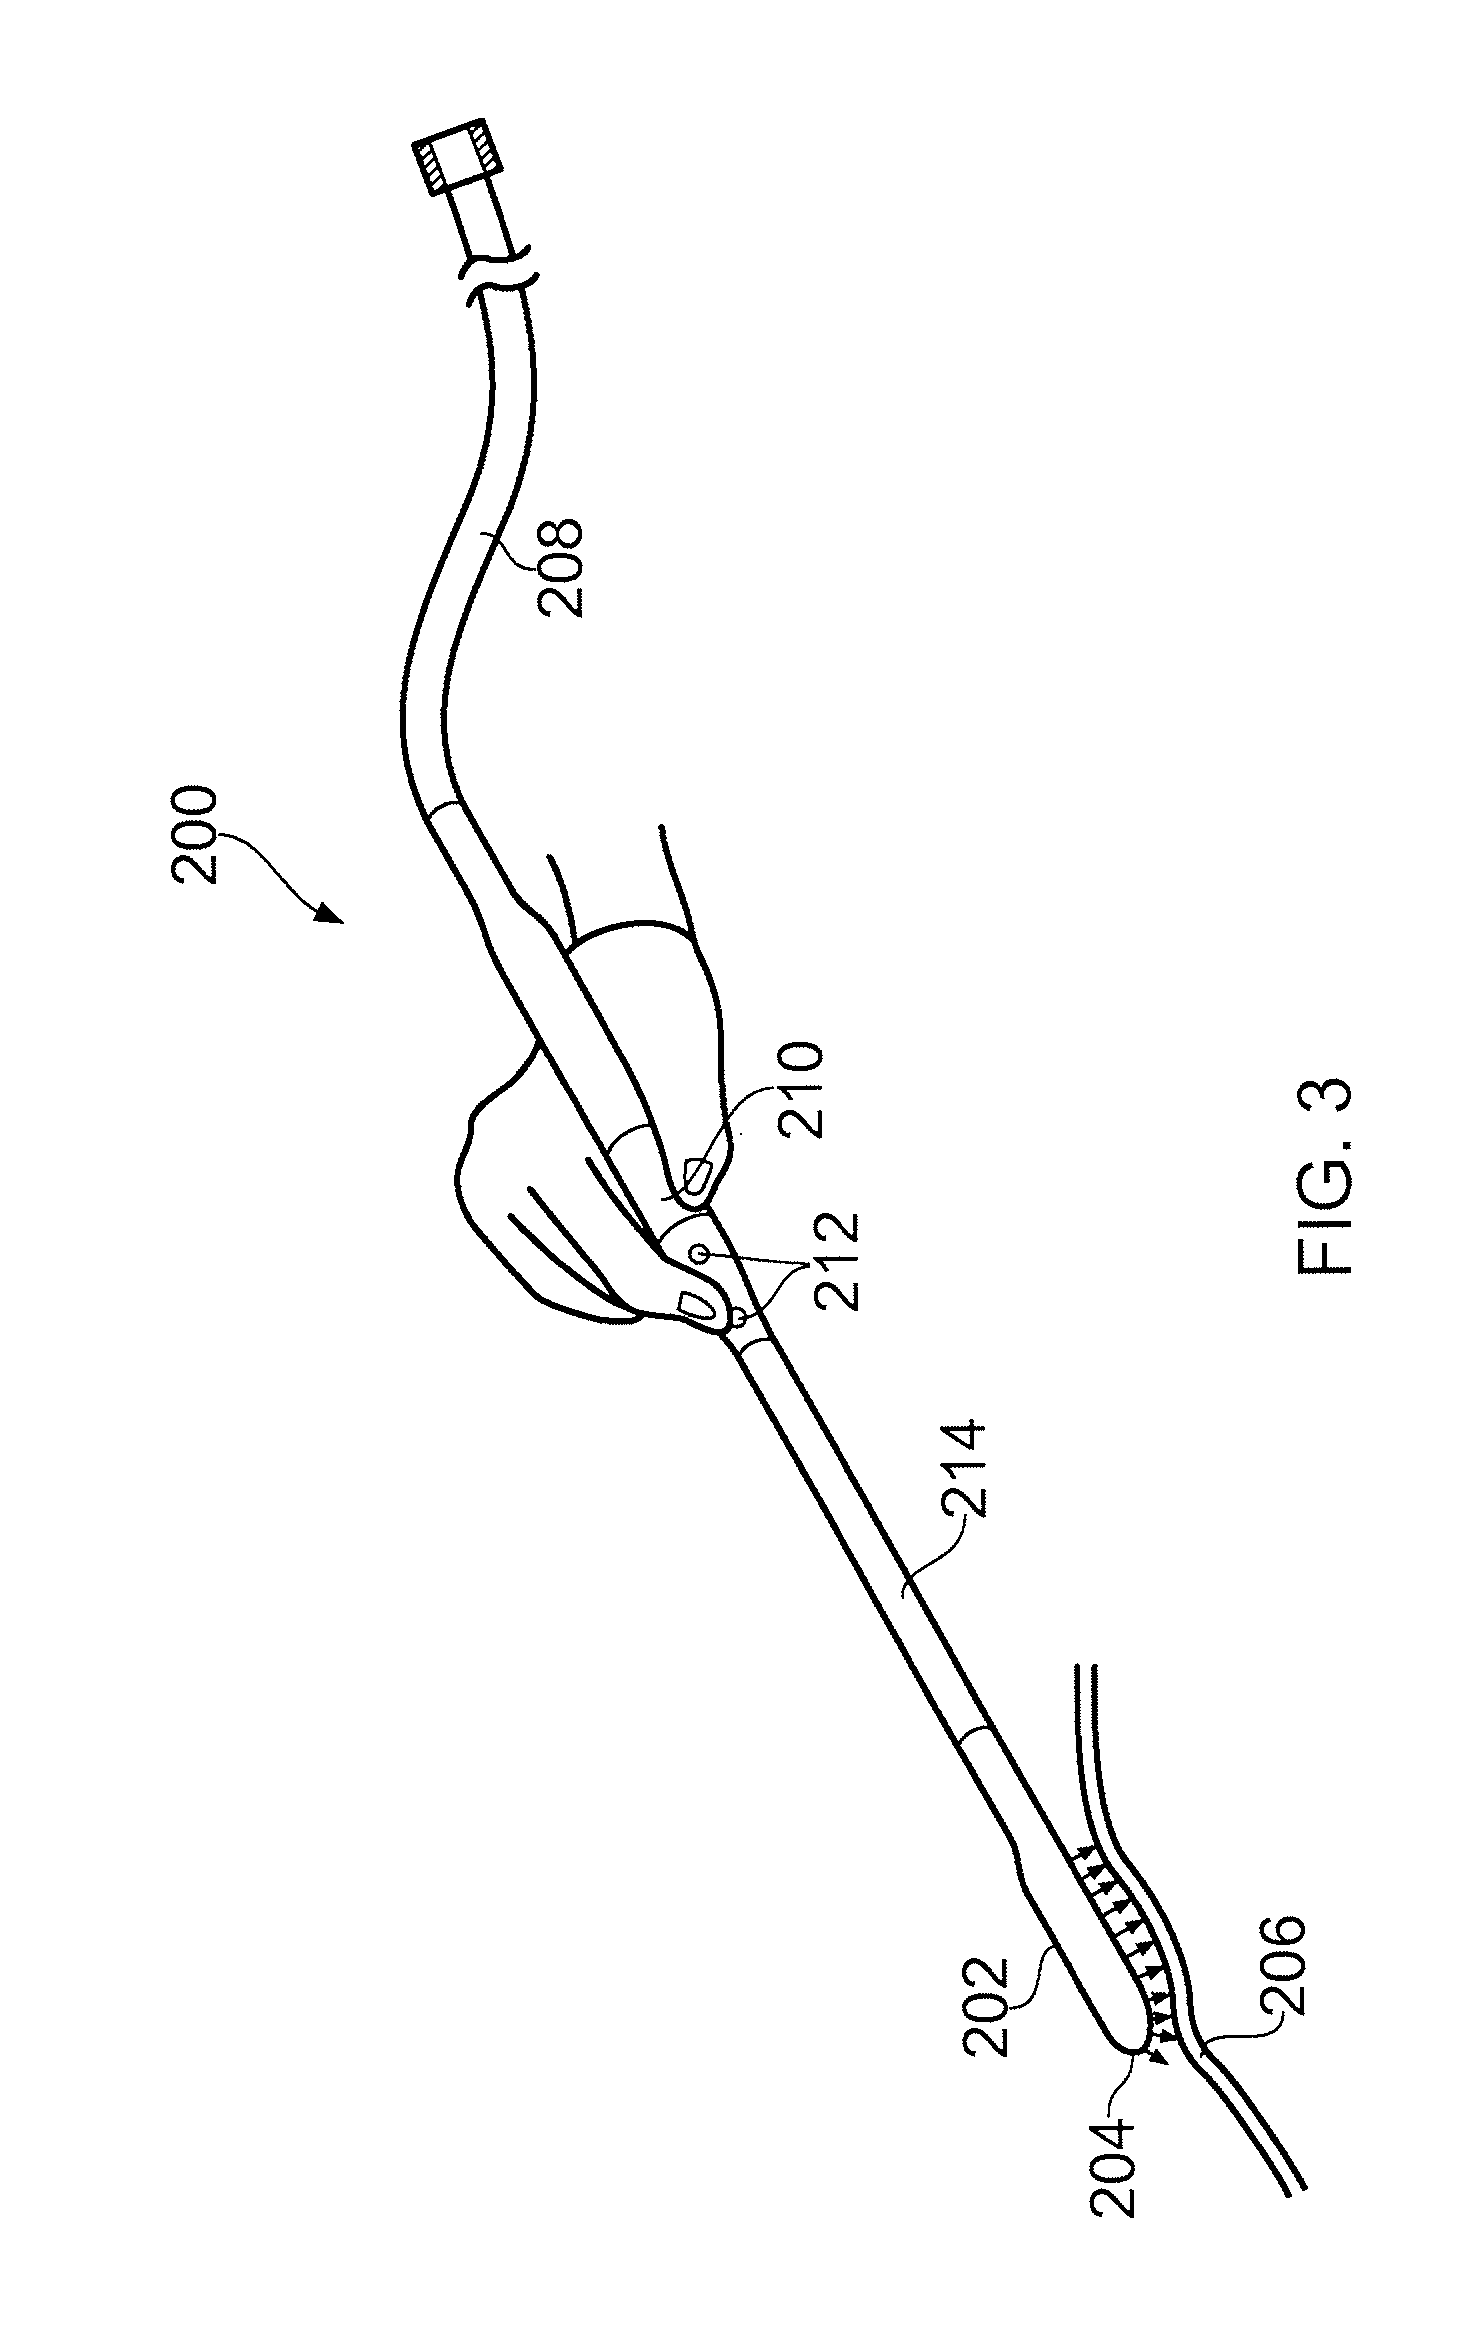 Electrosurgical instrument with dual radiofrequency and microwave electromagnetic energy